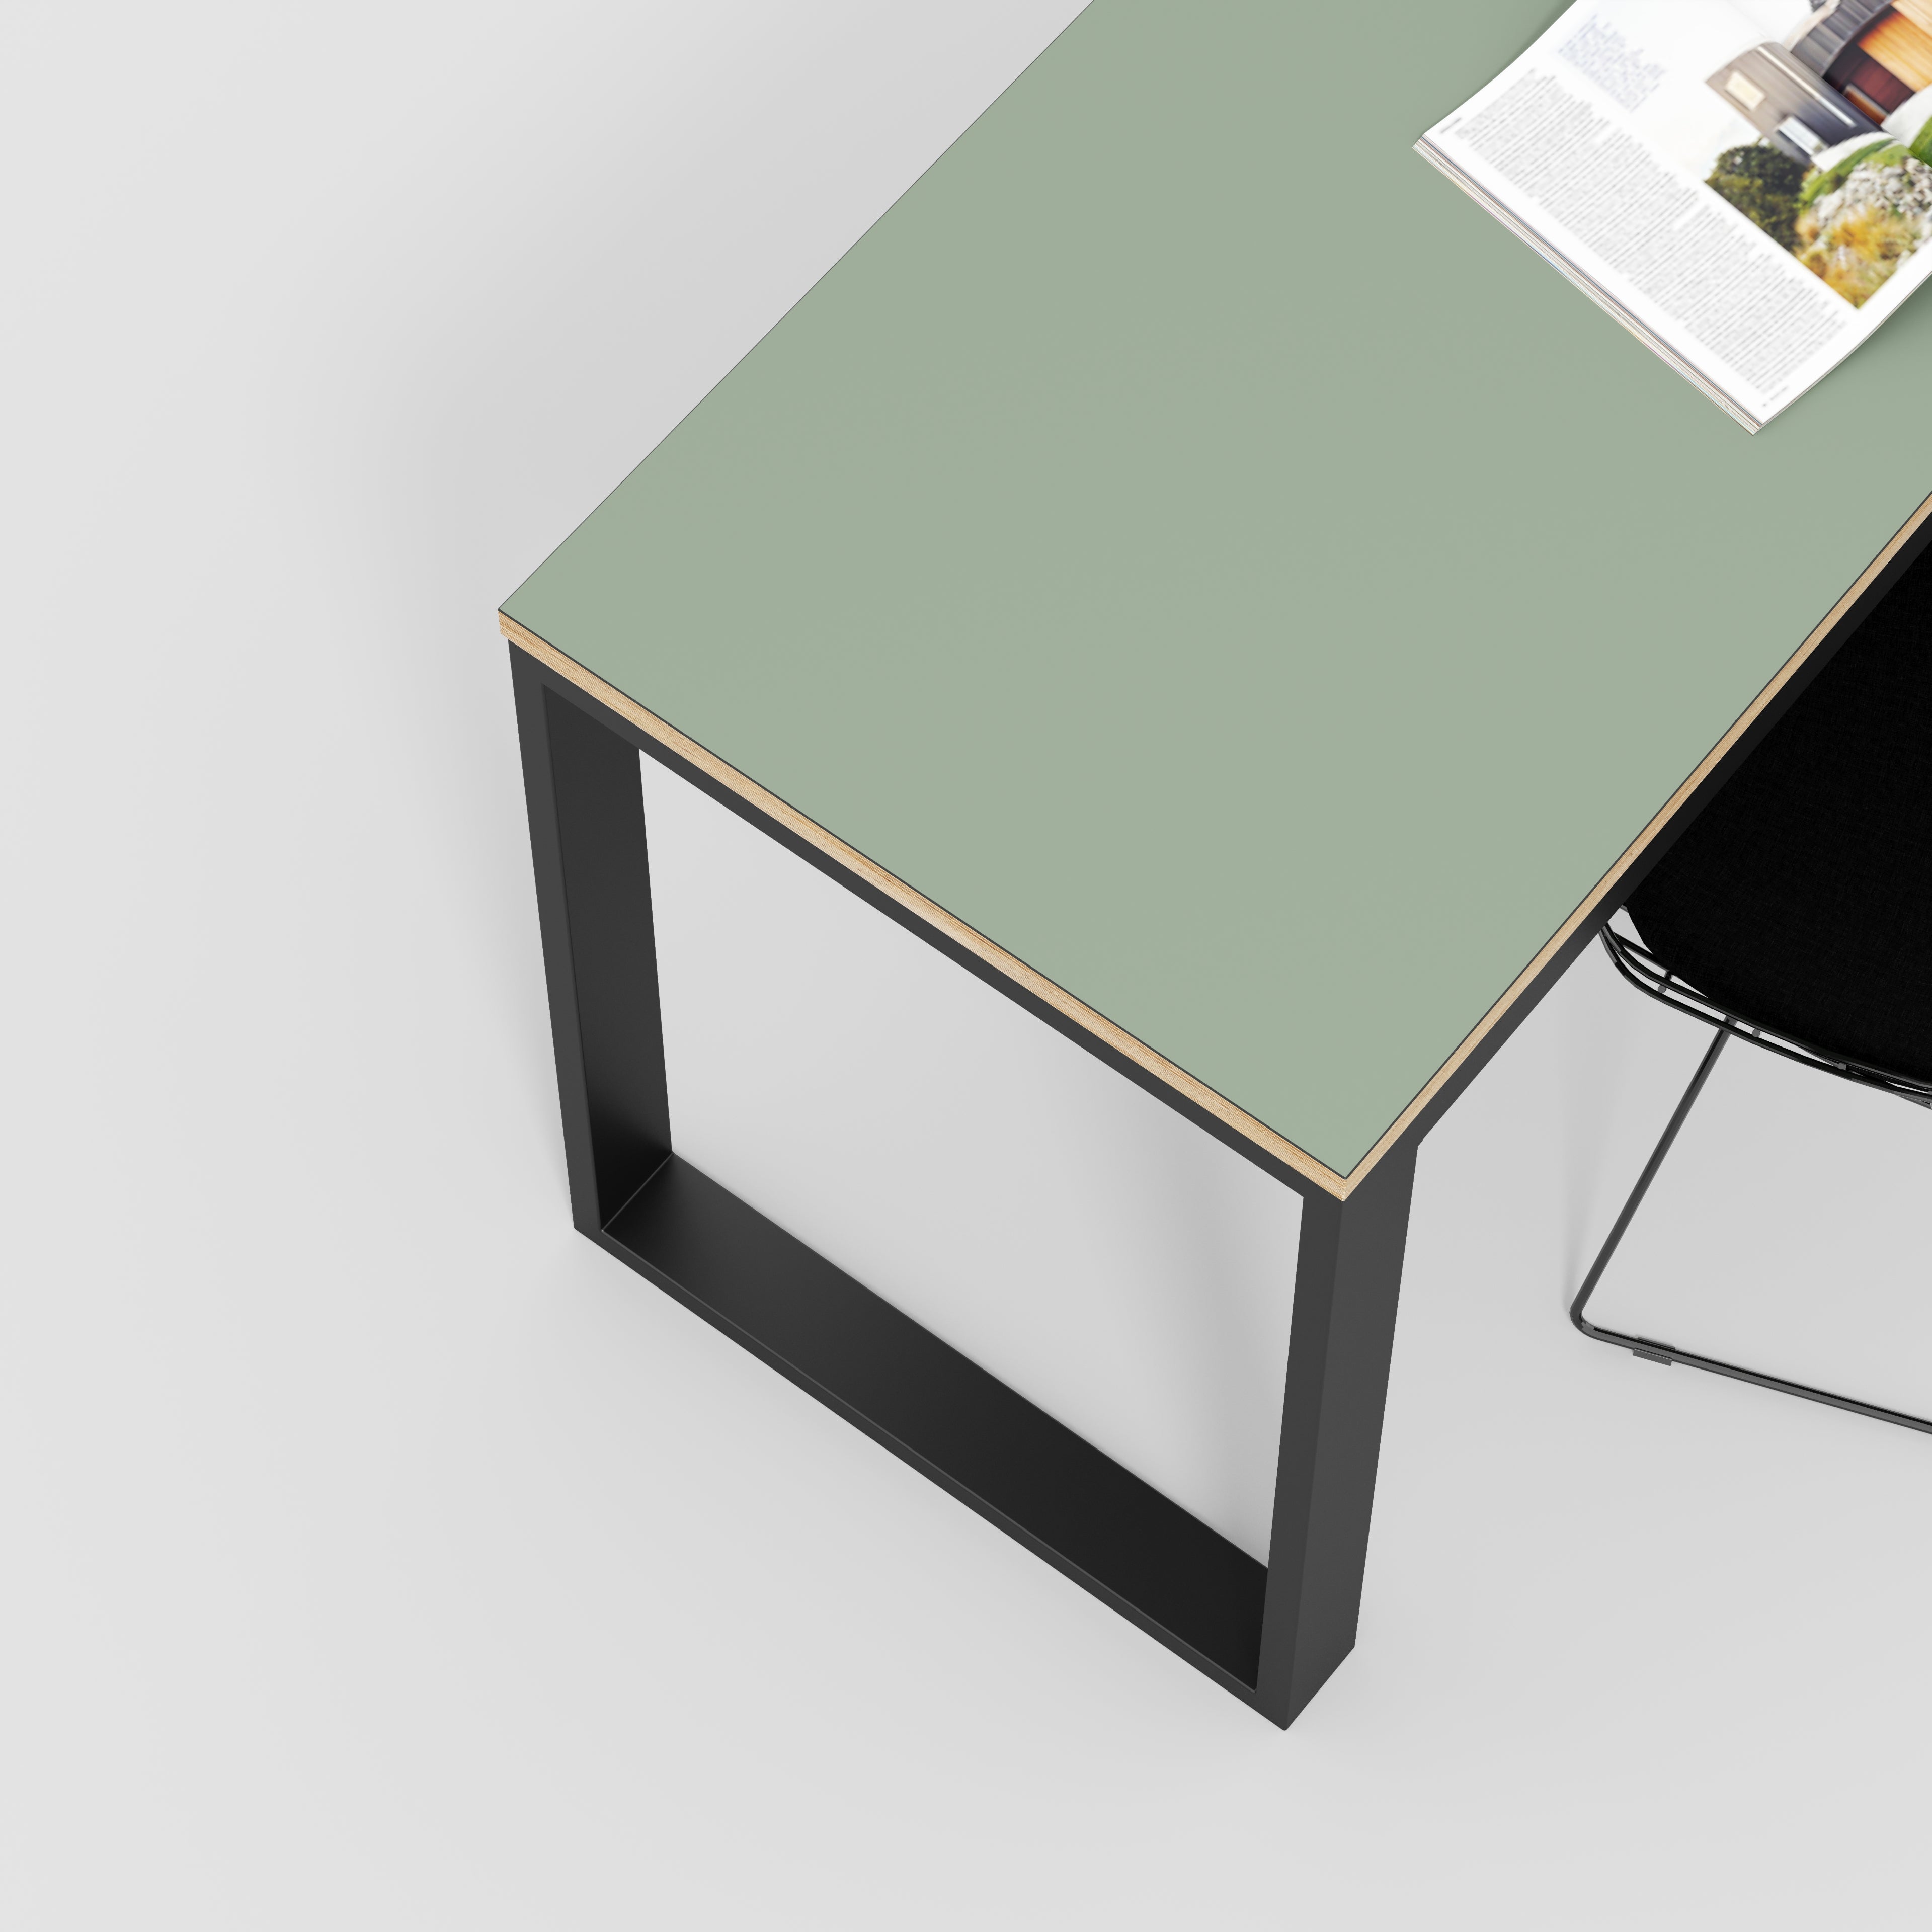 Desk with Black Industrial Frame - Formica Green Slate - 2400(w) x 585(d) x 735(h)